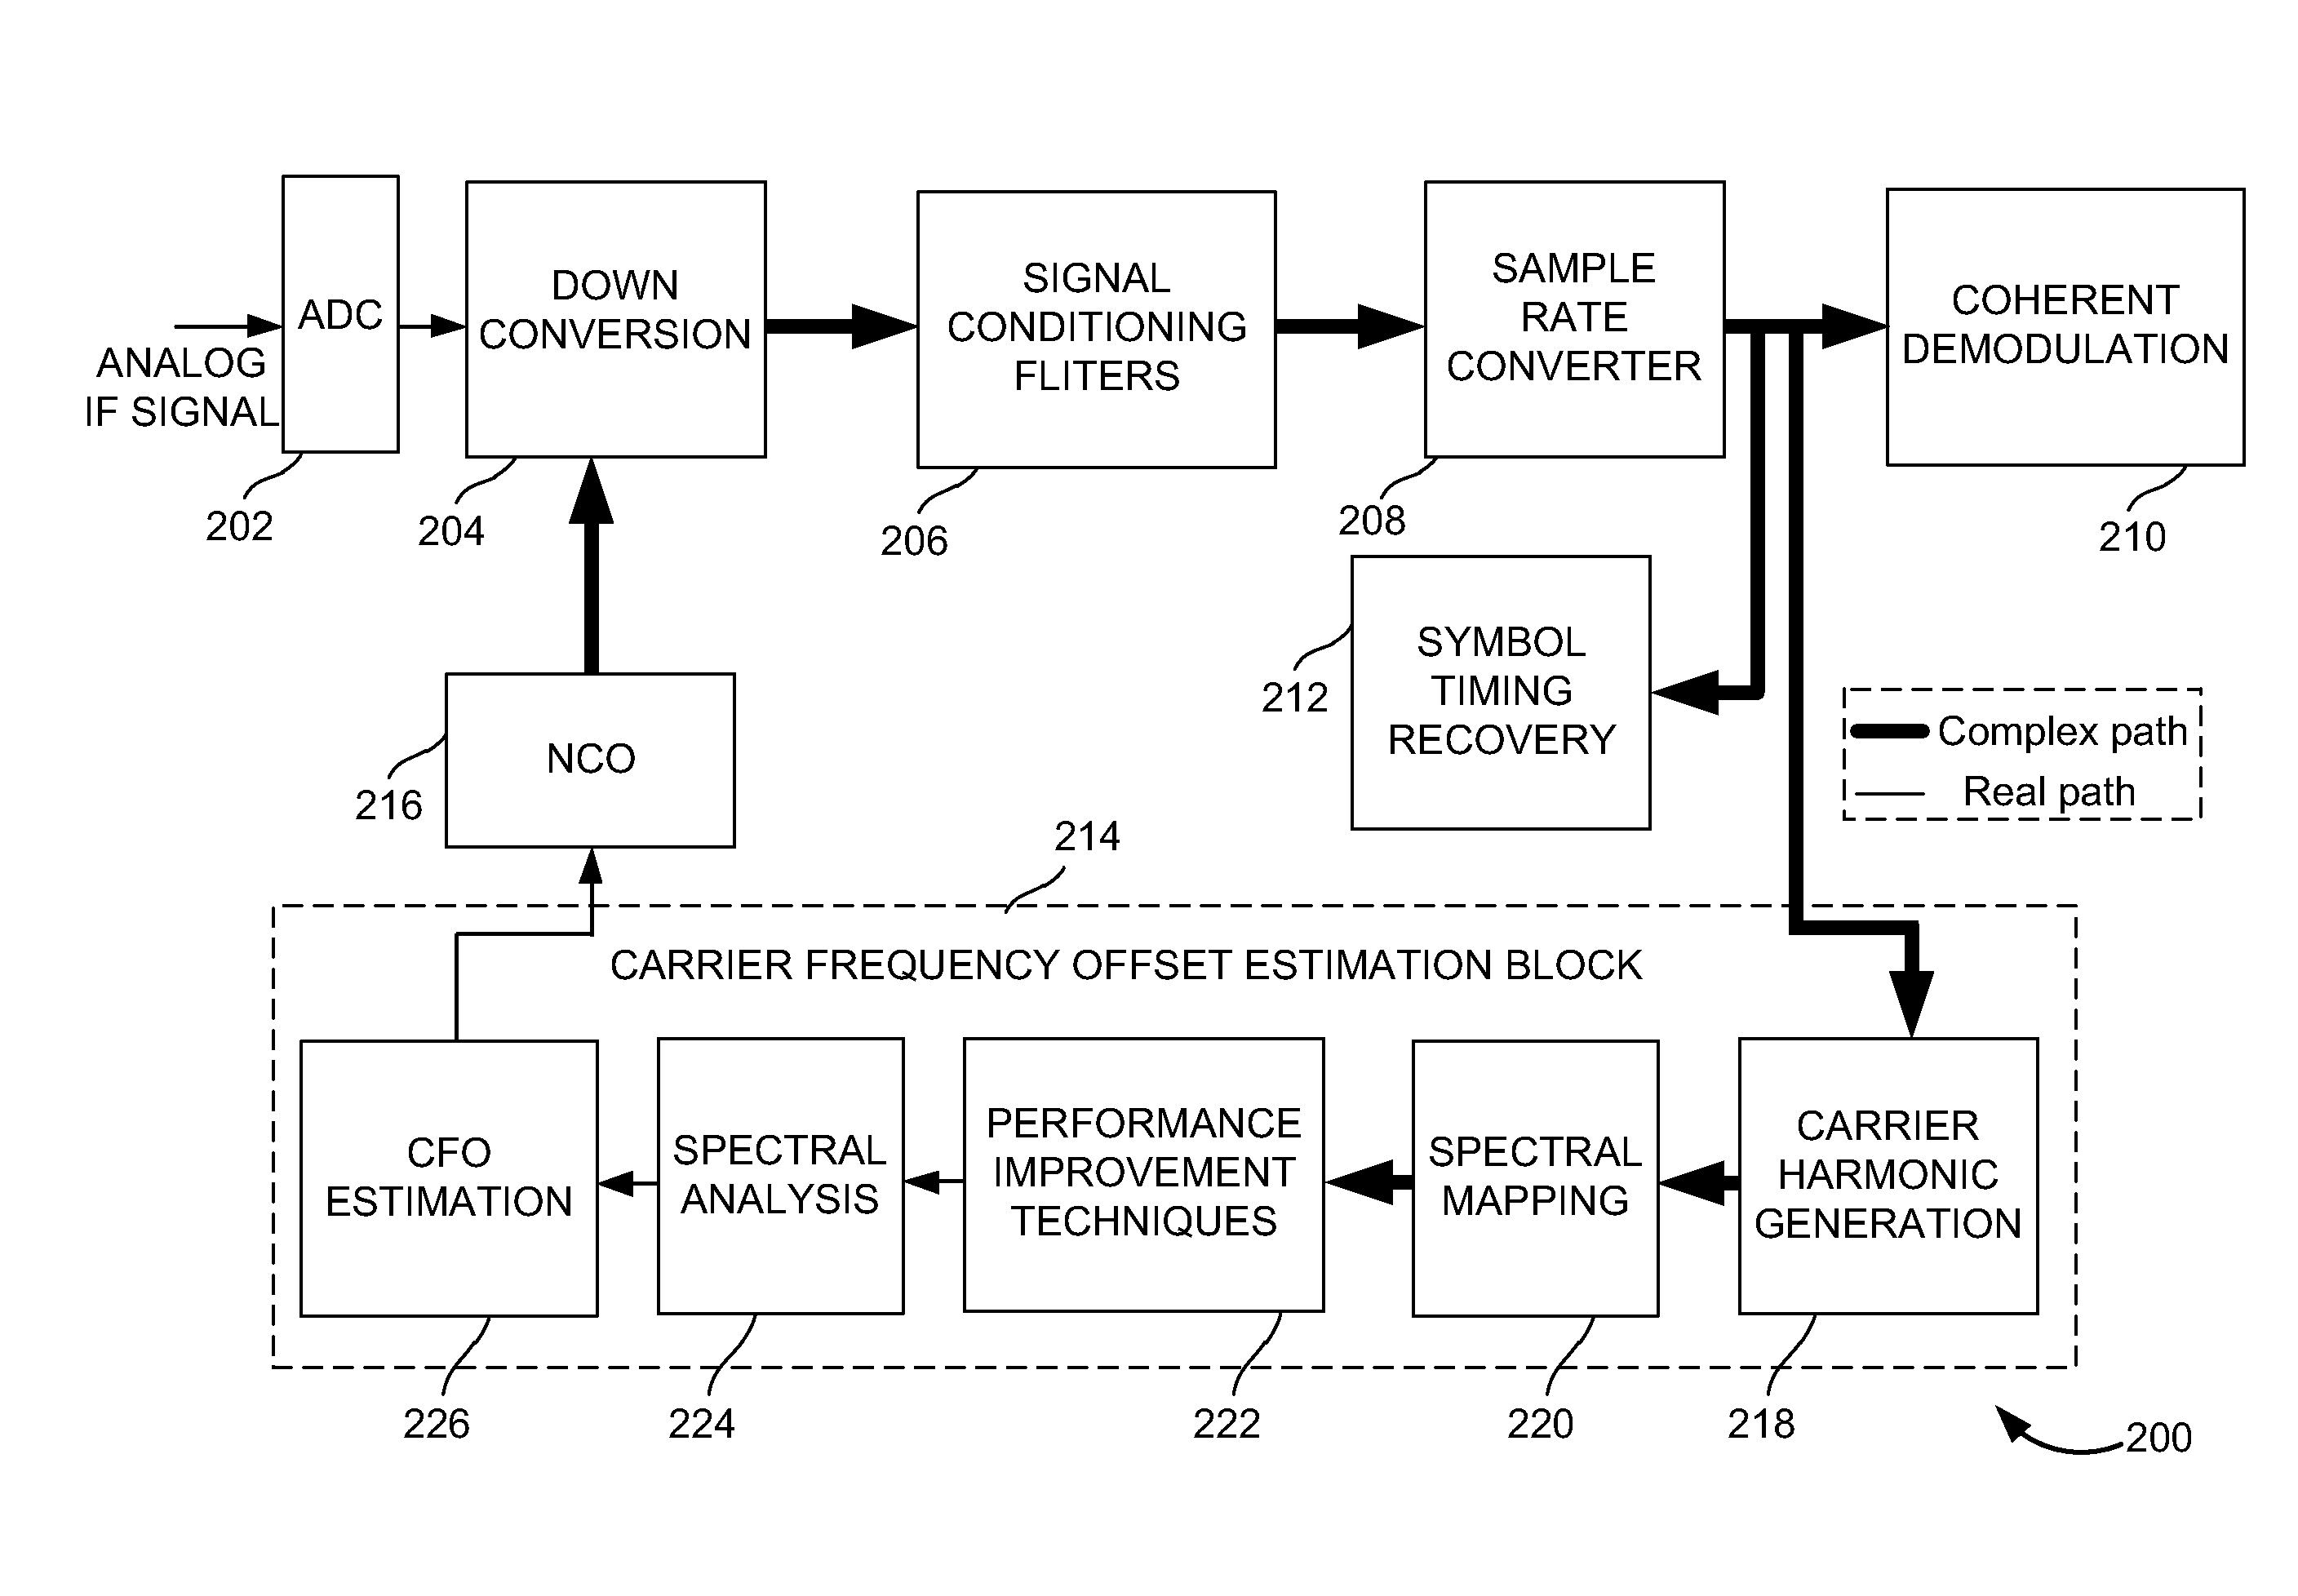 Carrier frequency offset estimation scheme, for digital standards with MPSK modulated preamble